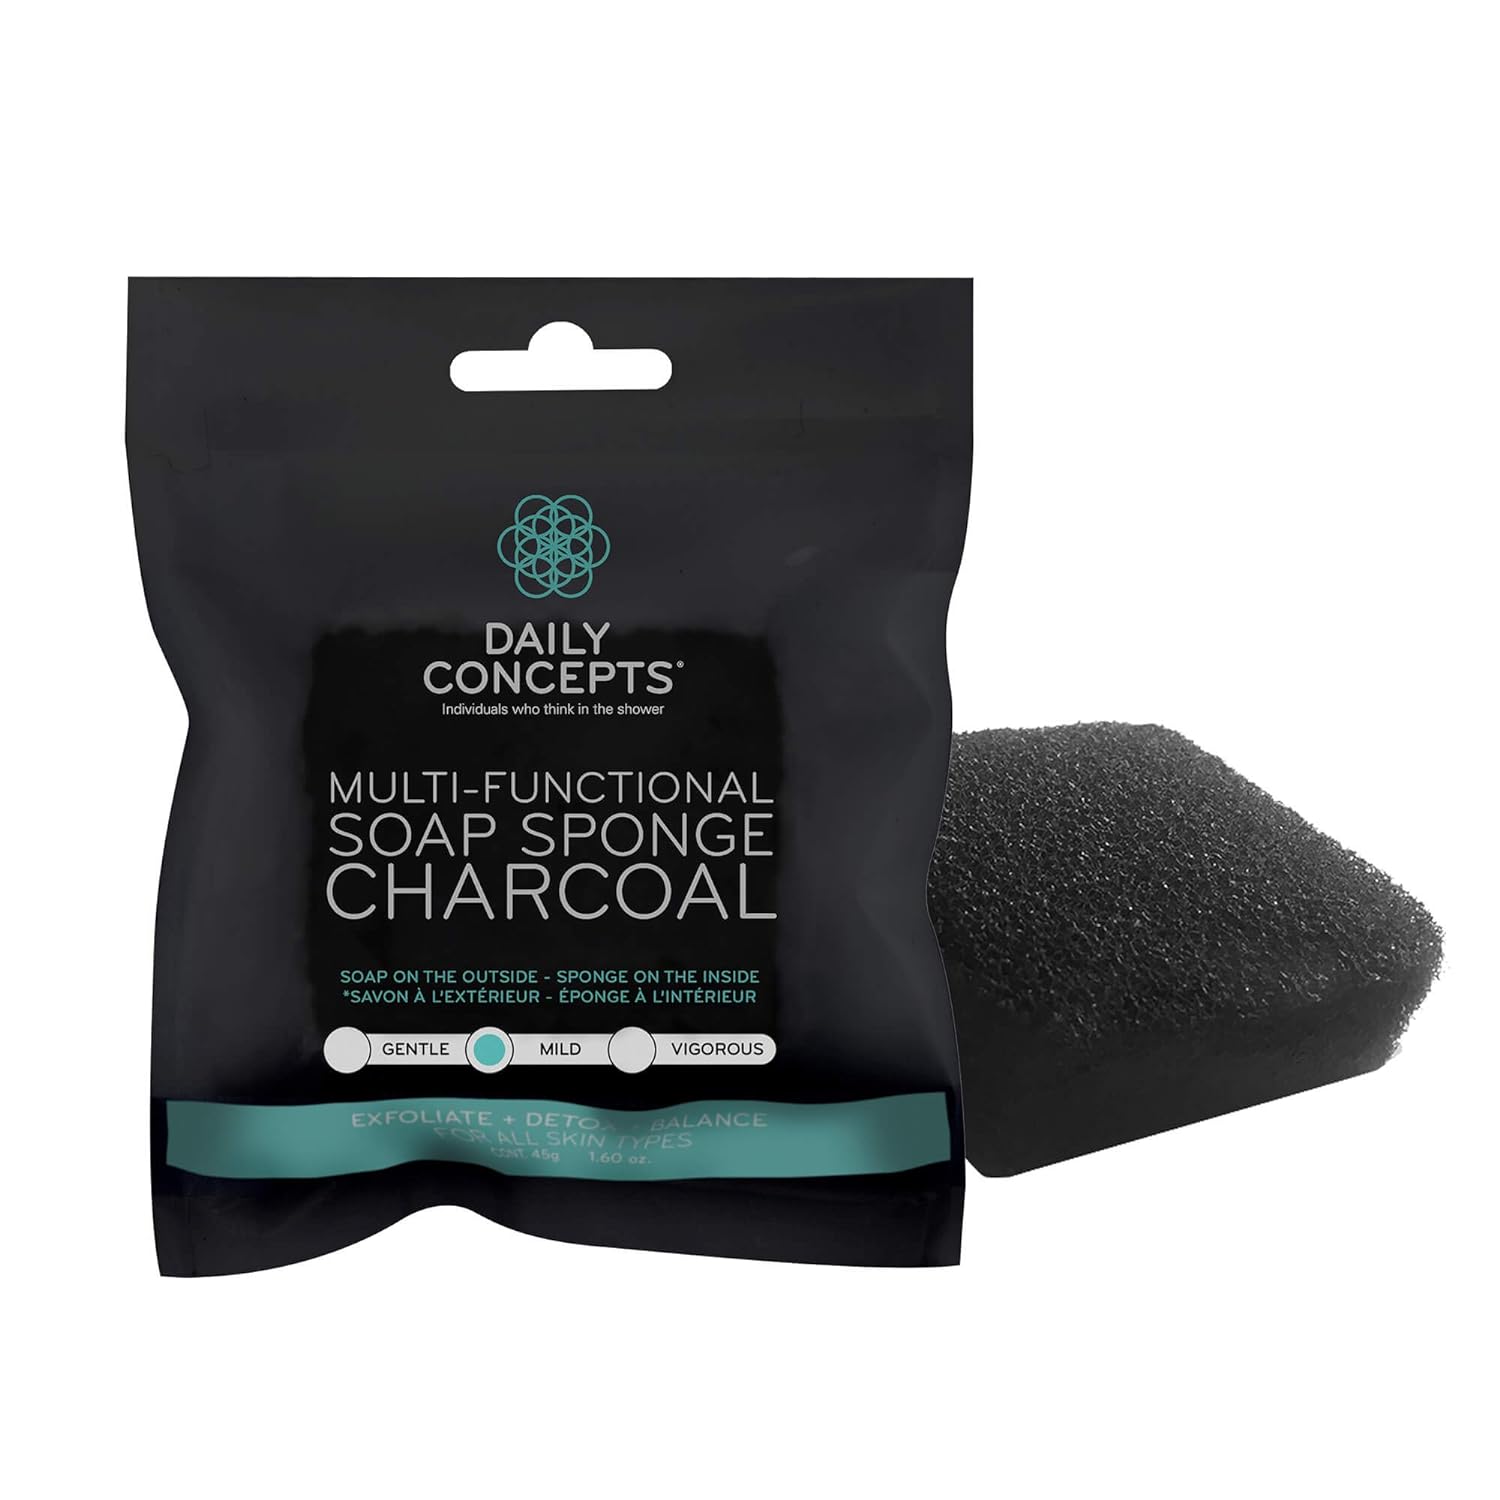 Multi Functionnal Soap Sponge Charcoal - Daily Concepts - Mild Texture Soap, Sponge With Infused With Detoxifying Charcoal Soap To Purge Skin Of Impurities And Elevate The Overall Texture Of Skin